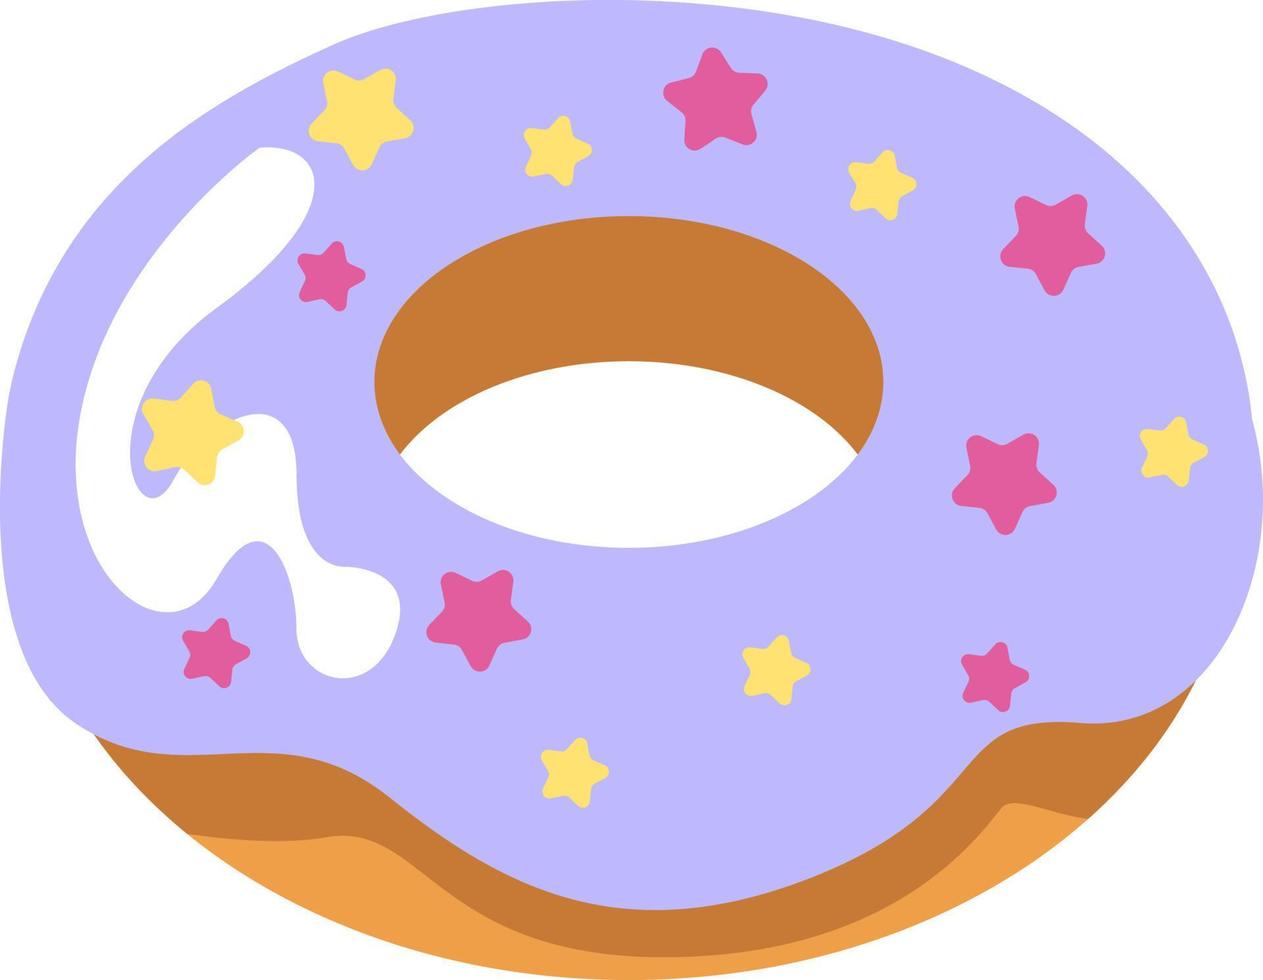 Donut with stars, illustration, vector on a white background